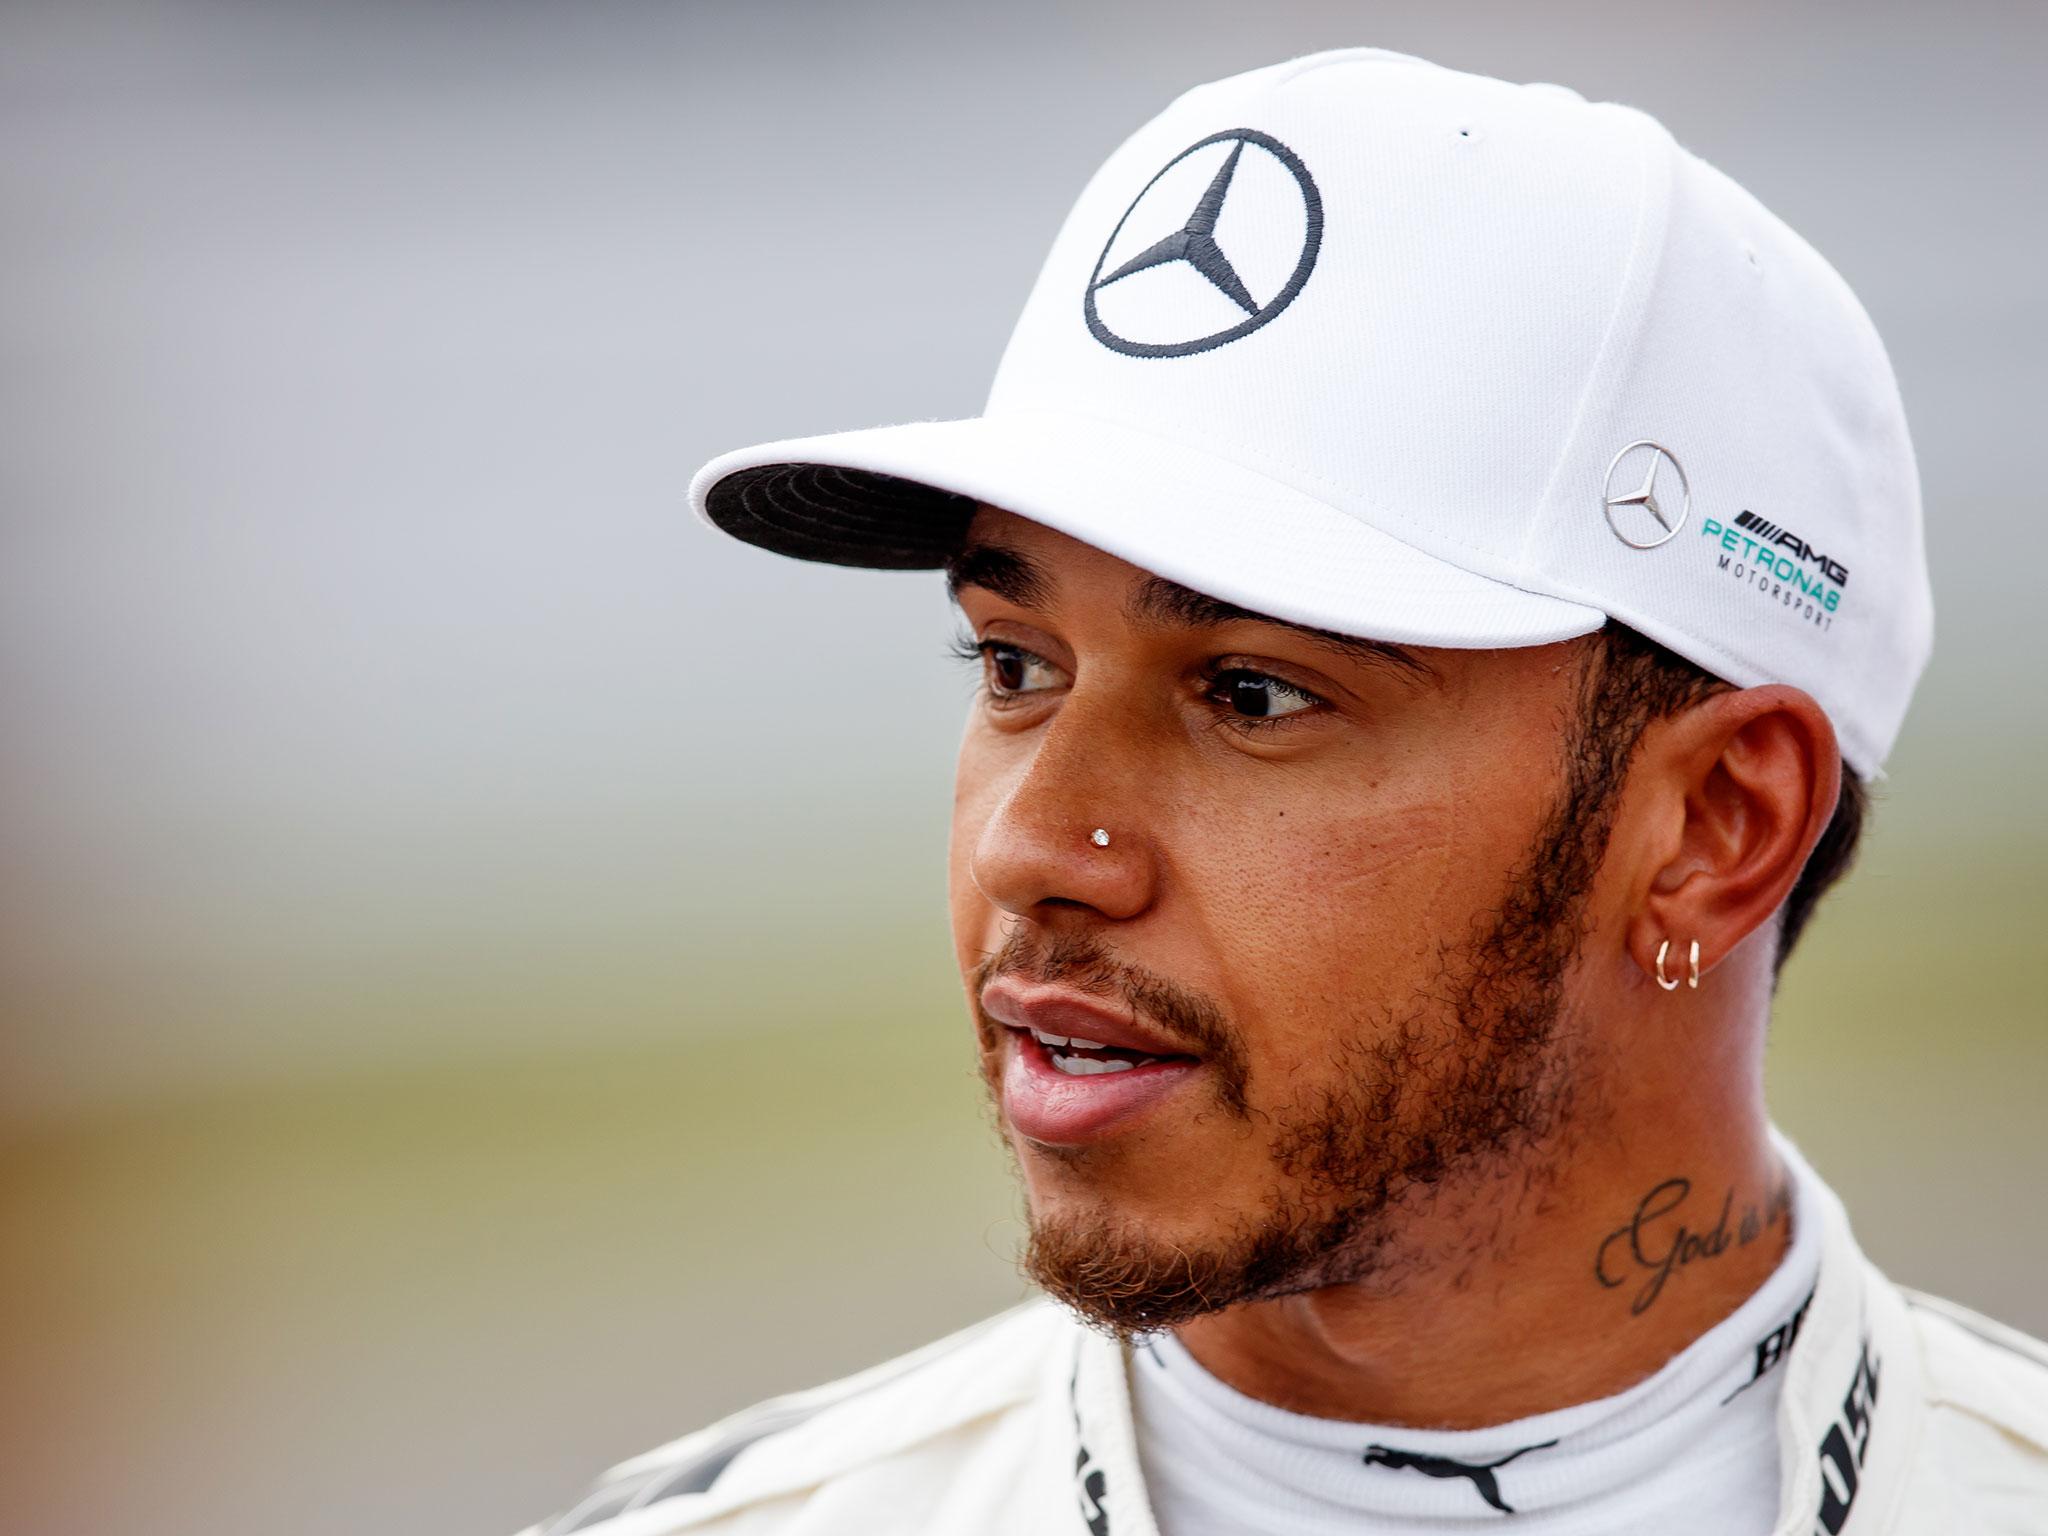 Lewis Hamilton is in a strong position to increase his championship lead